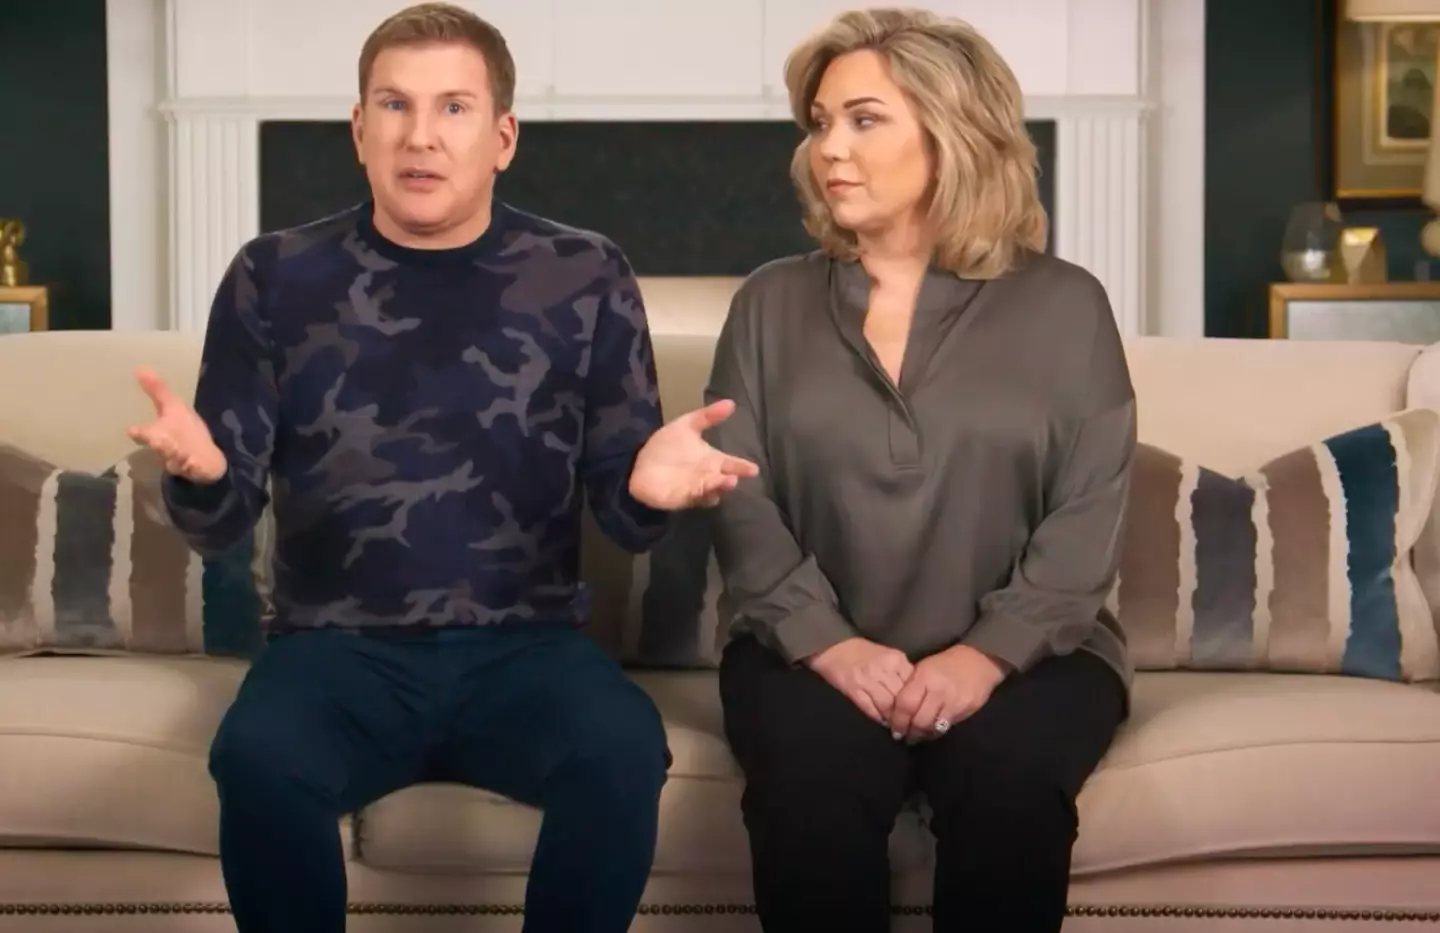 Todd and Julie appeared in the Hayu show Chrisley Knows Best.